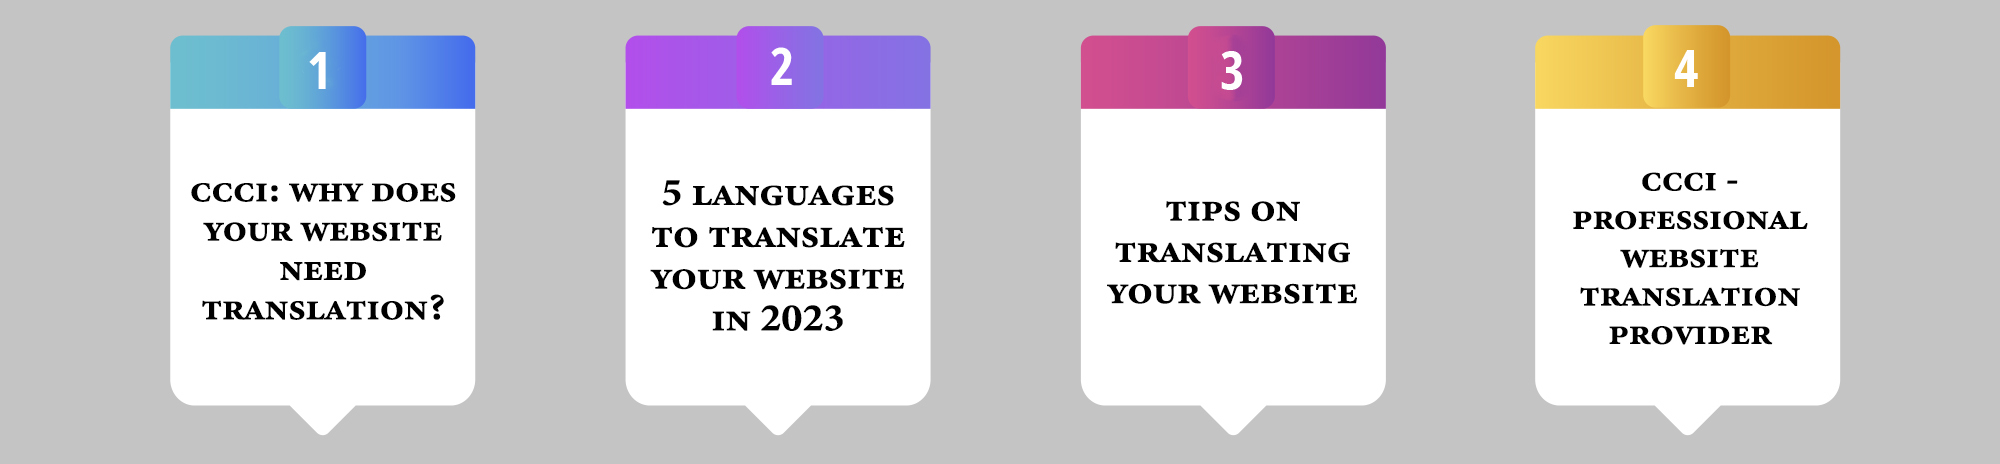 languages to translate your website